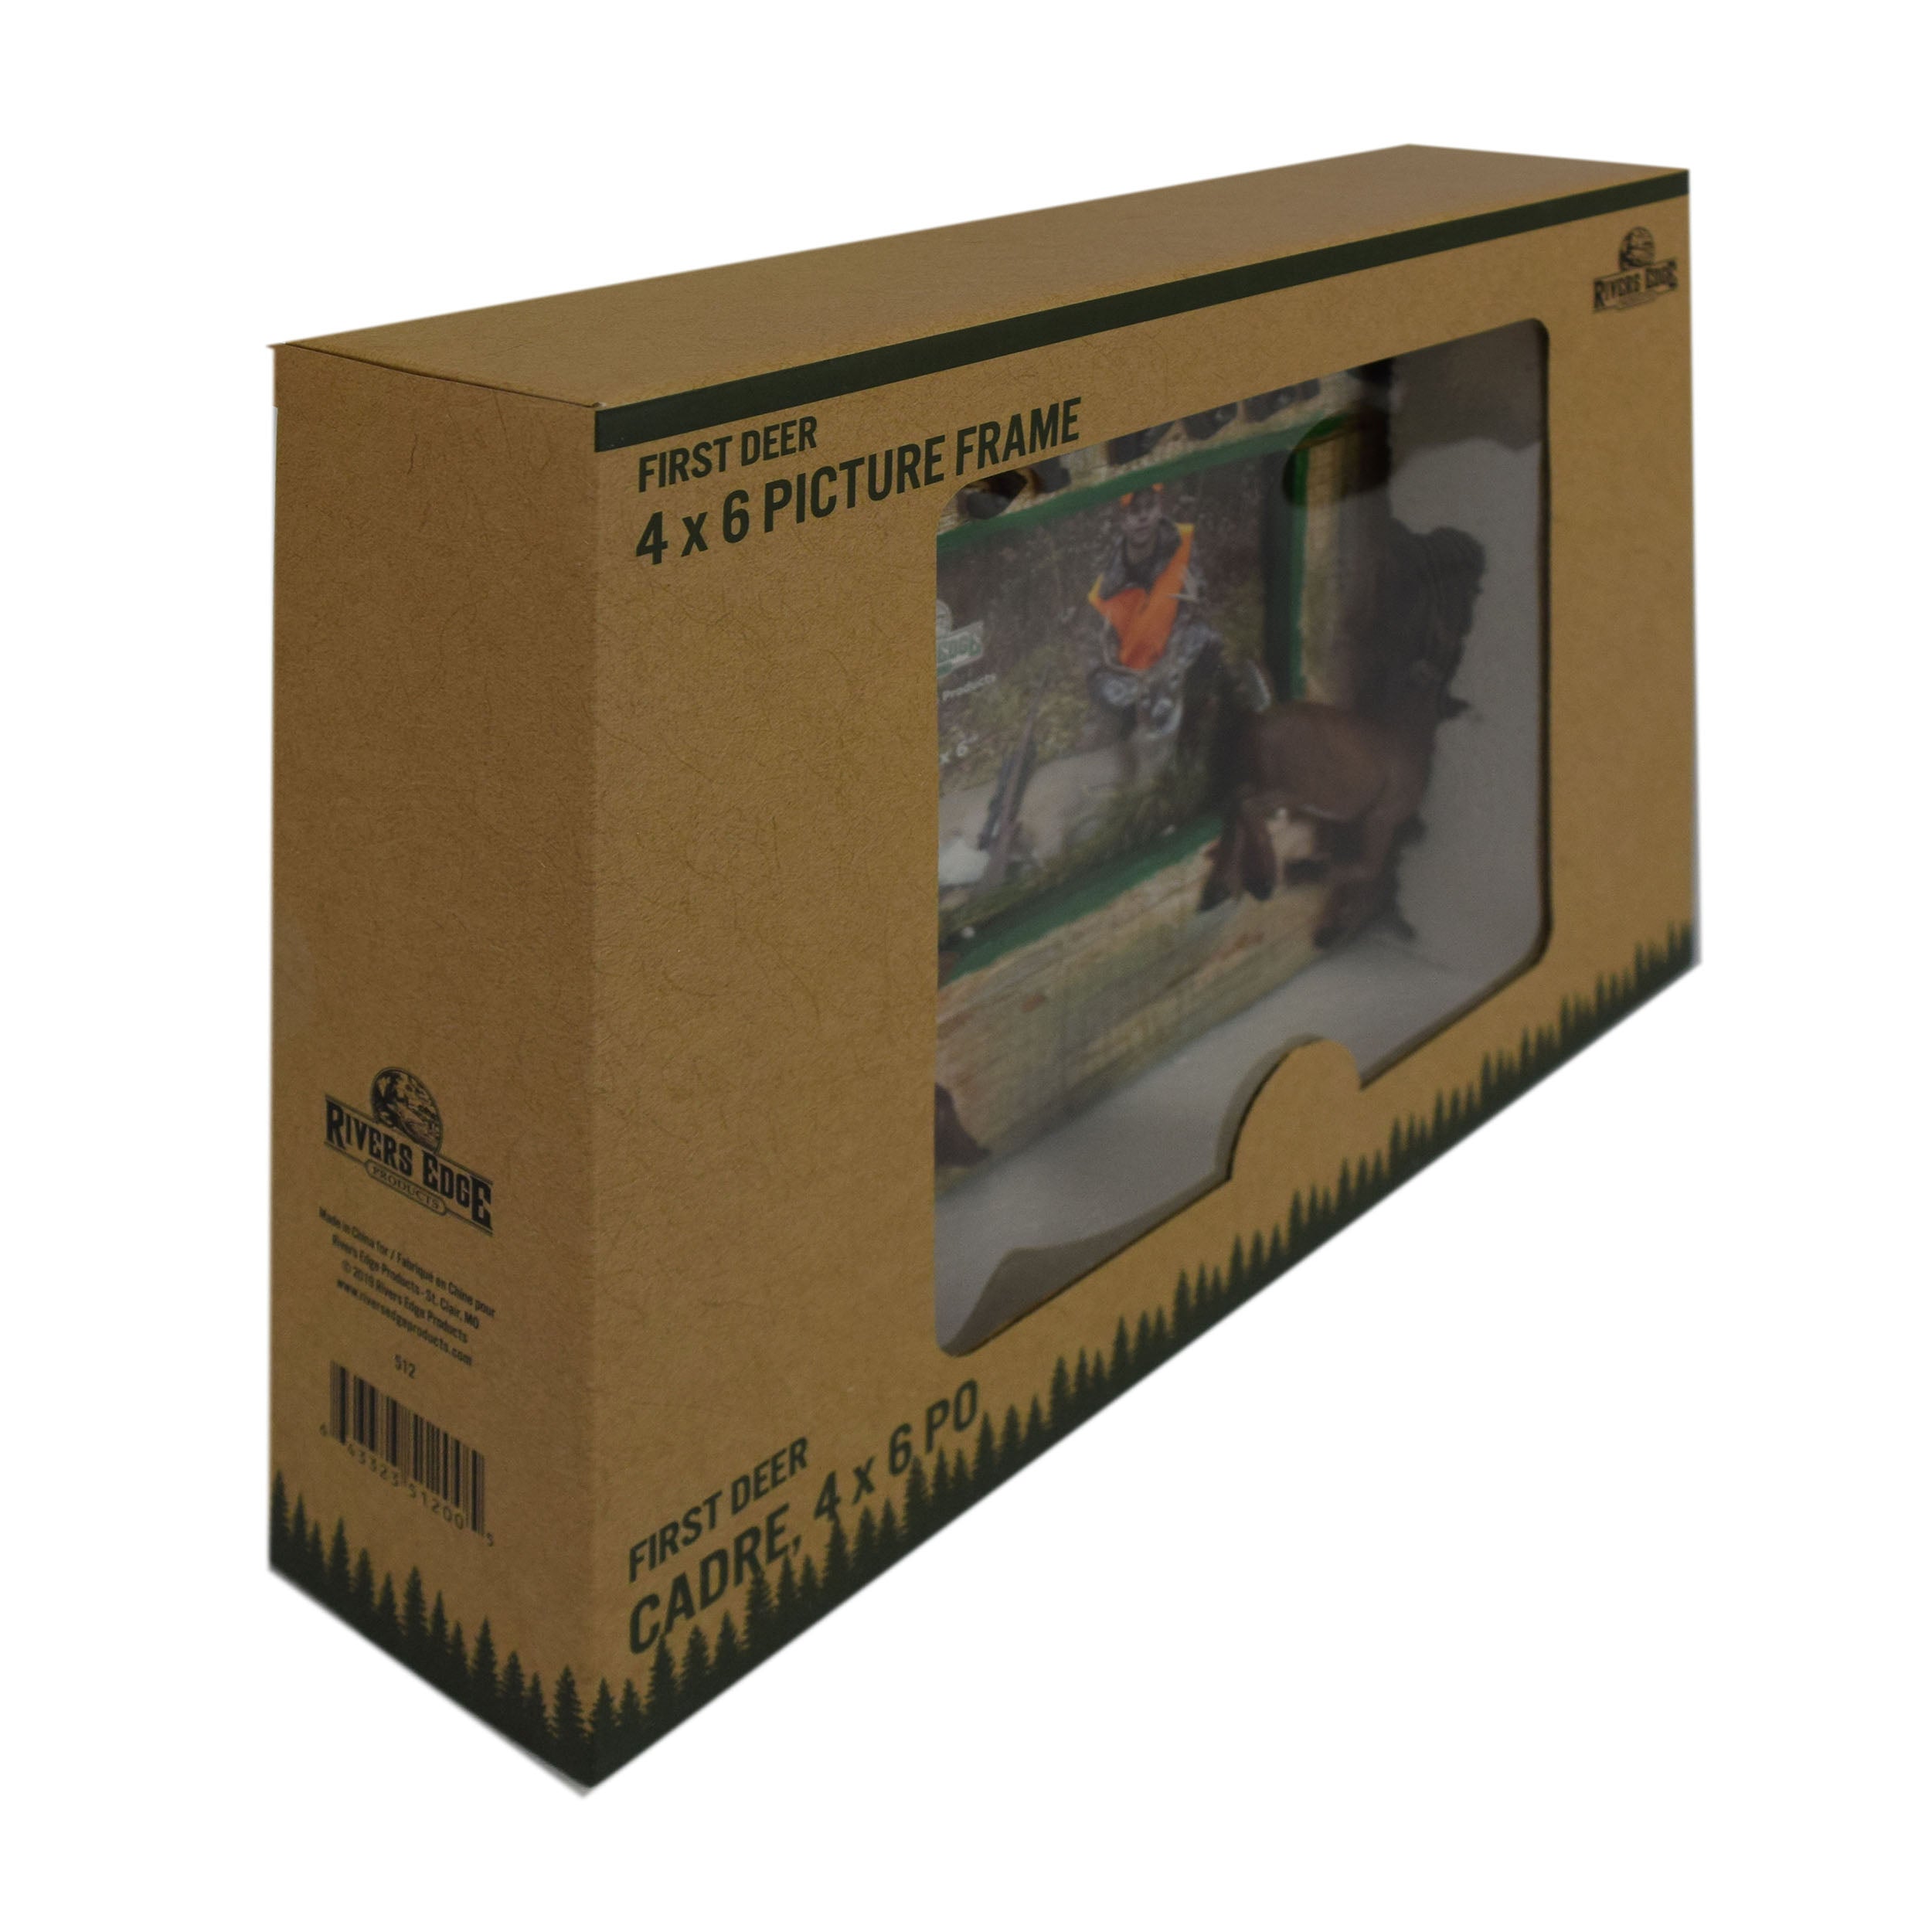 Picture Frame 4-Inch x 6-Inch - Duck Hunt